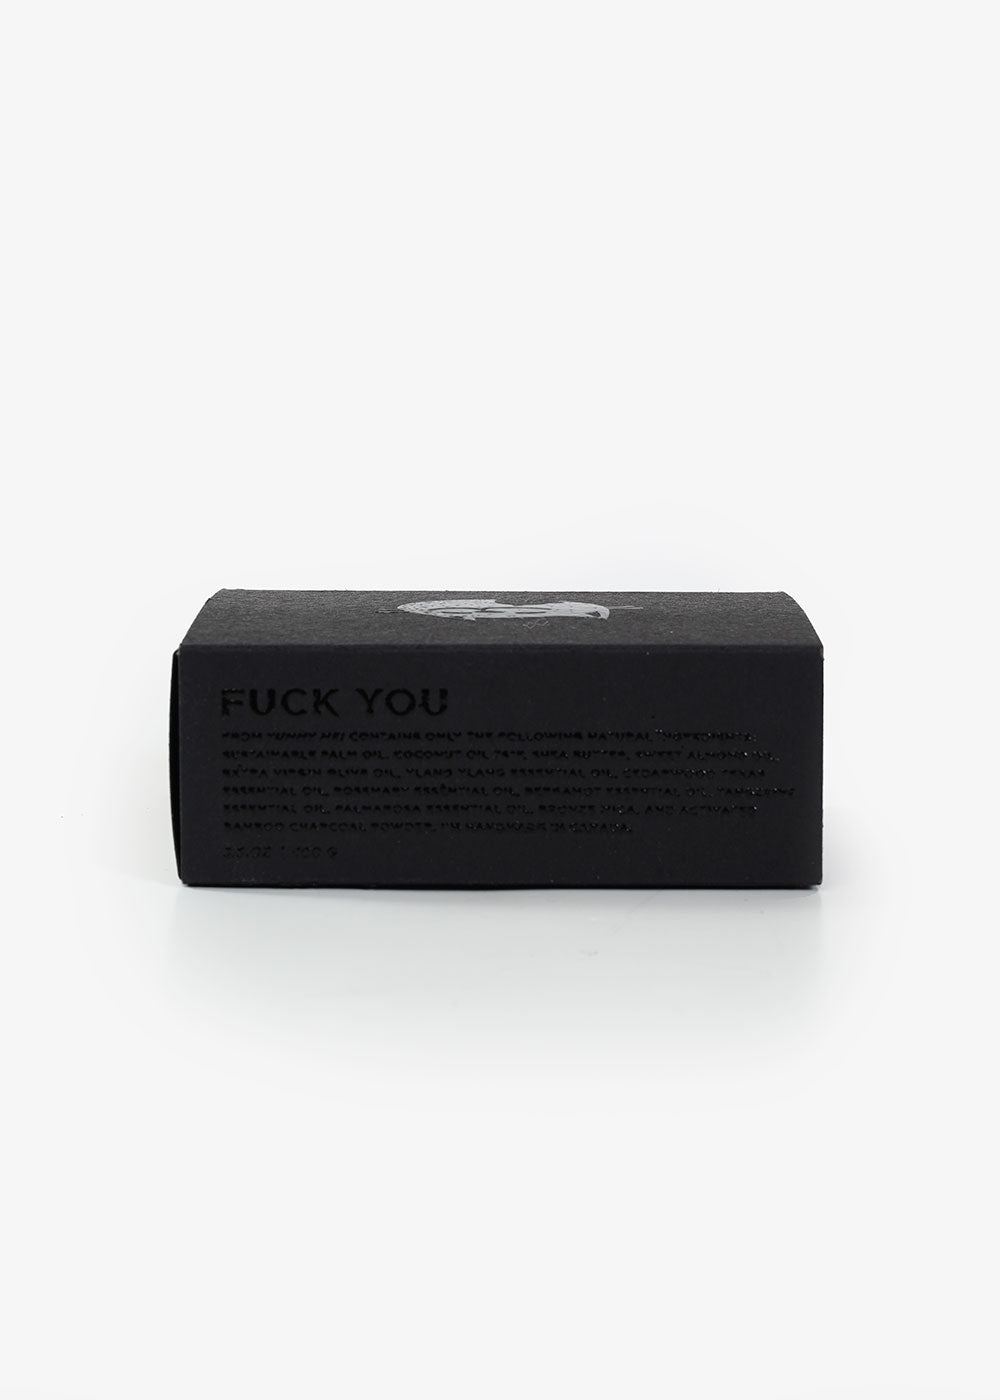 Yummy Me F*ck You Soap - New Classics Studios Sustainable Ethical Fashion Canada